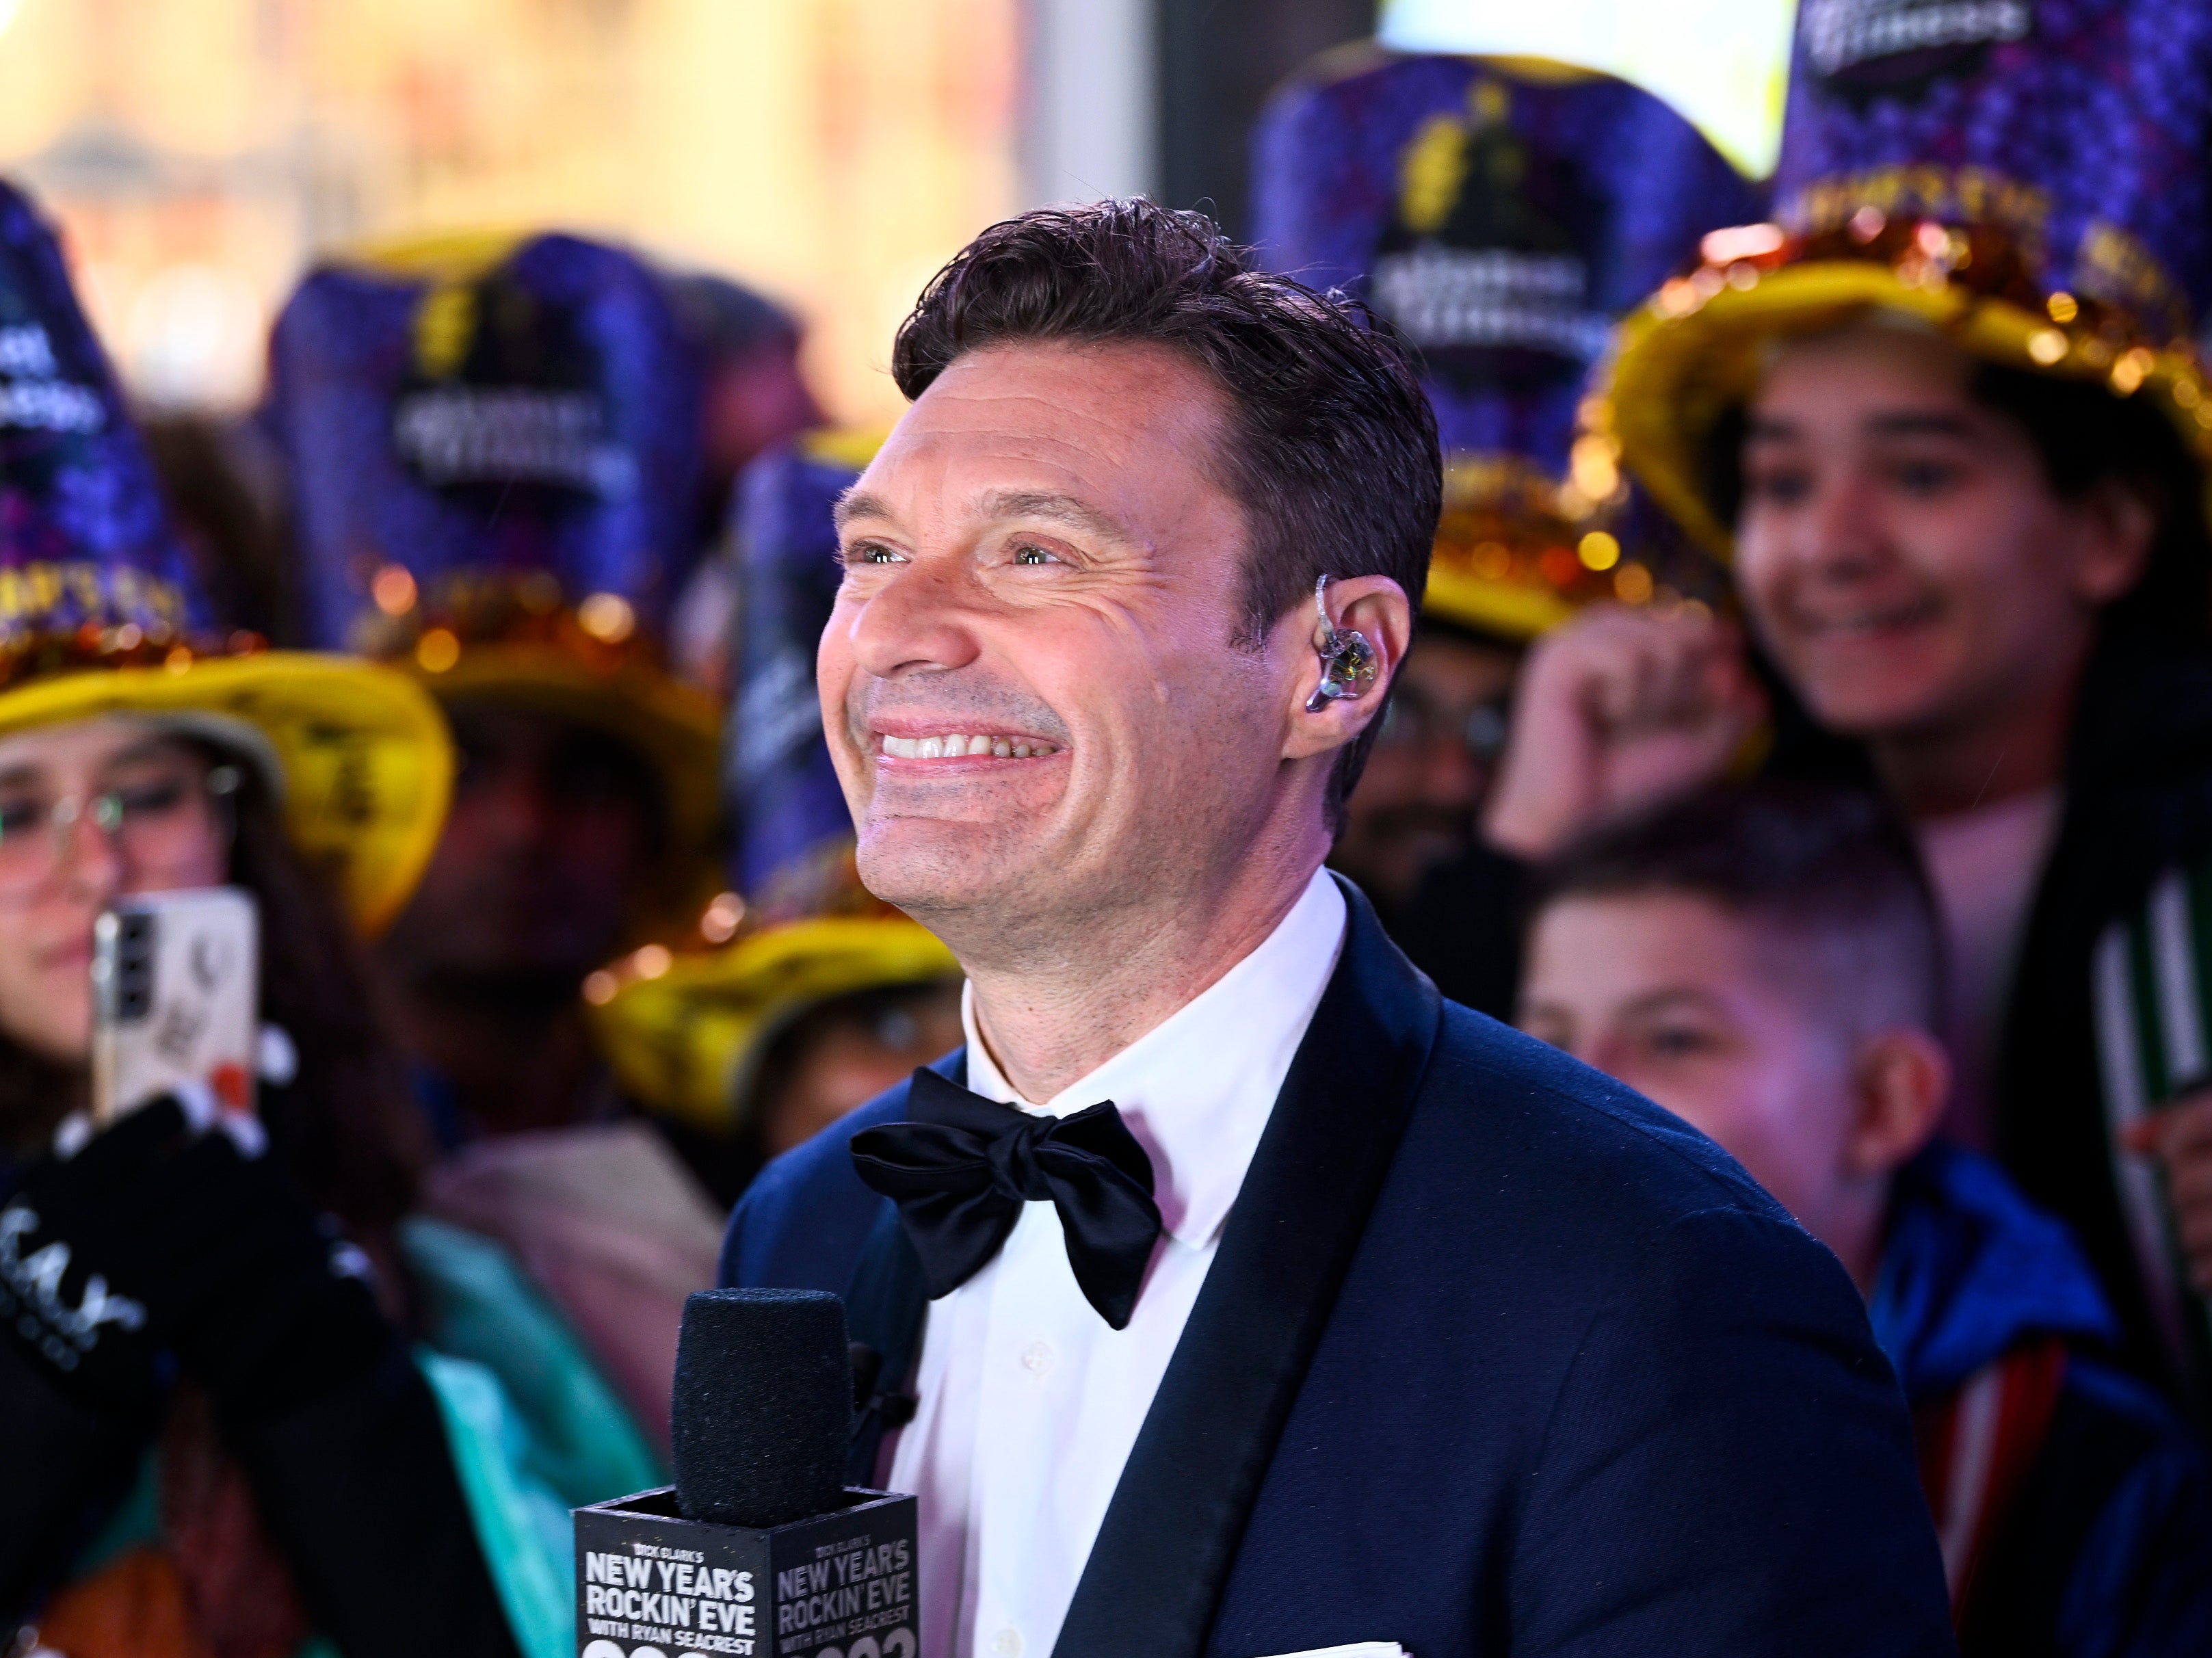 Ryan Seacrest presenting ABC’s New Year’s Eve coverage